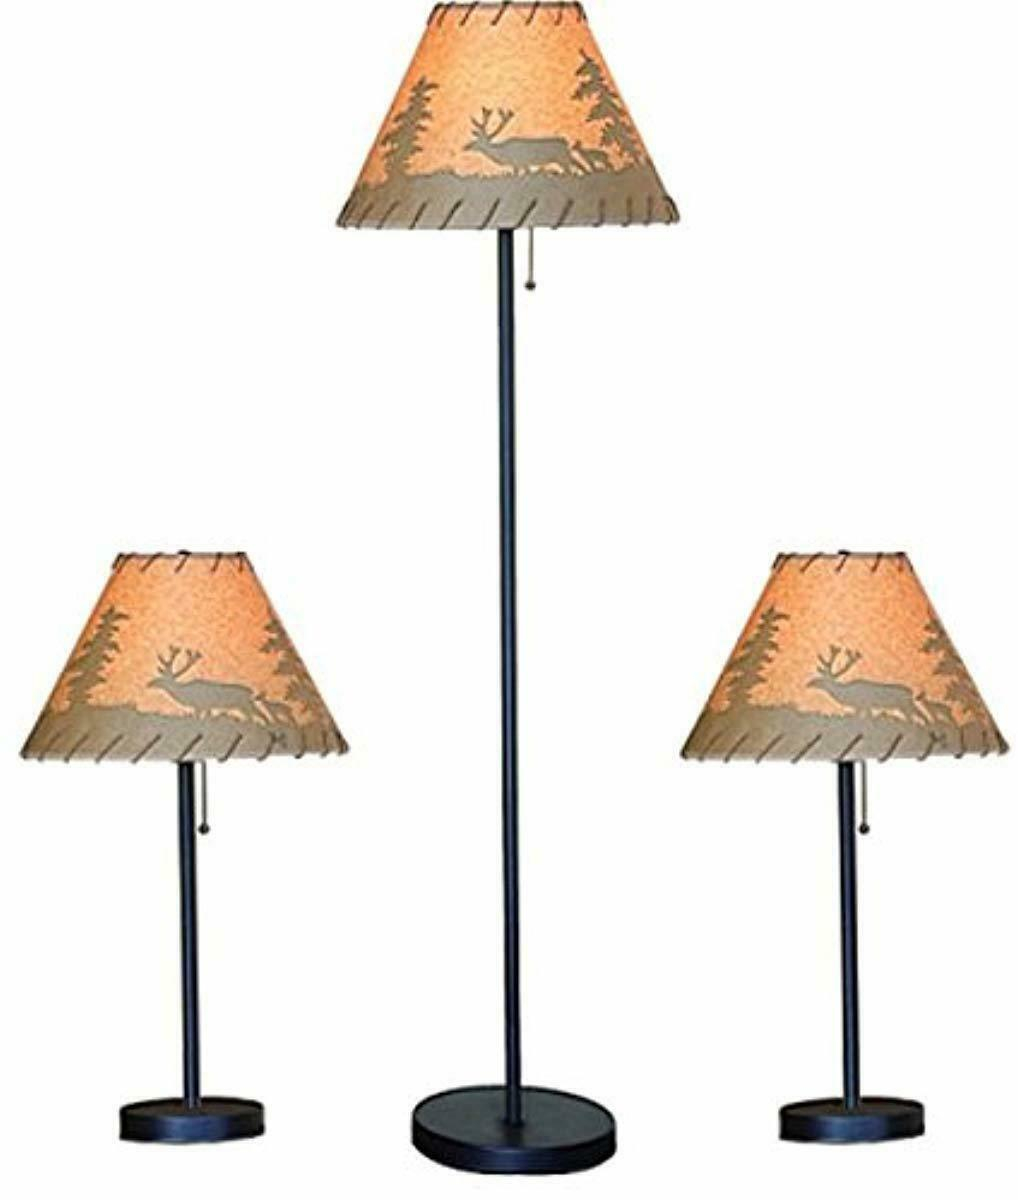 Details About Catalina Lighting Lodge Table And Floor Lamp Set With Printed Pattern On Oil Pap regarding sizing 1018 X 1200